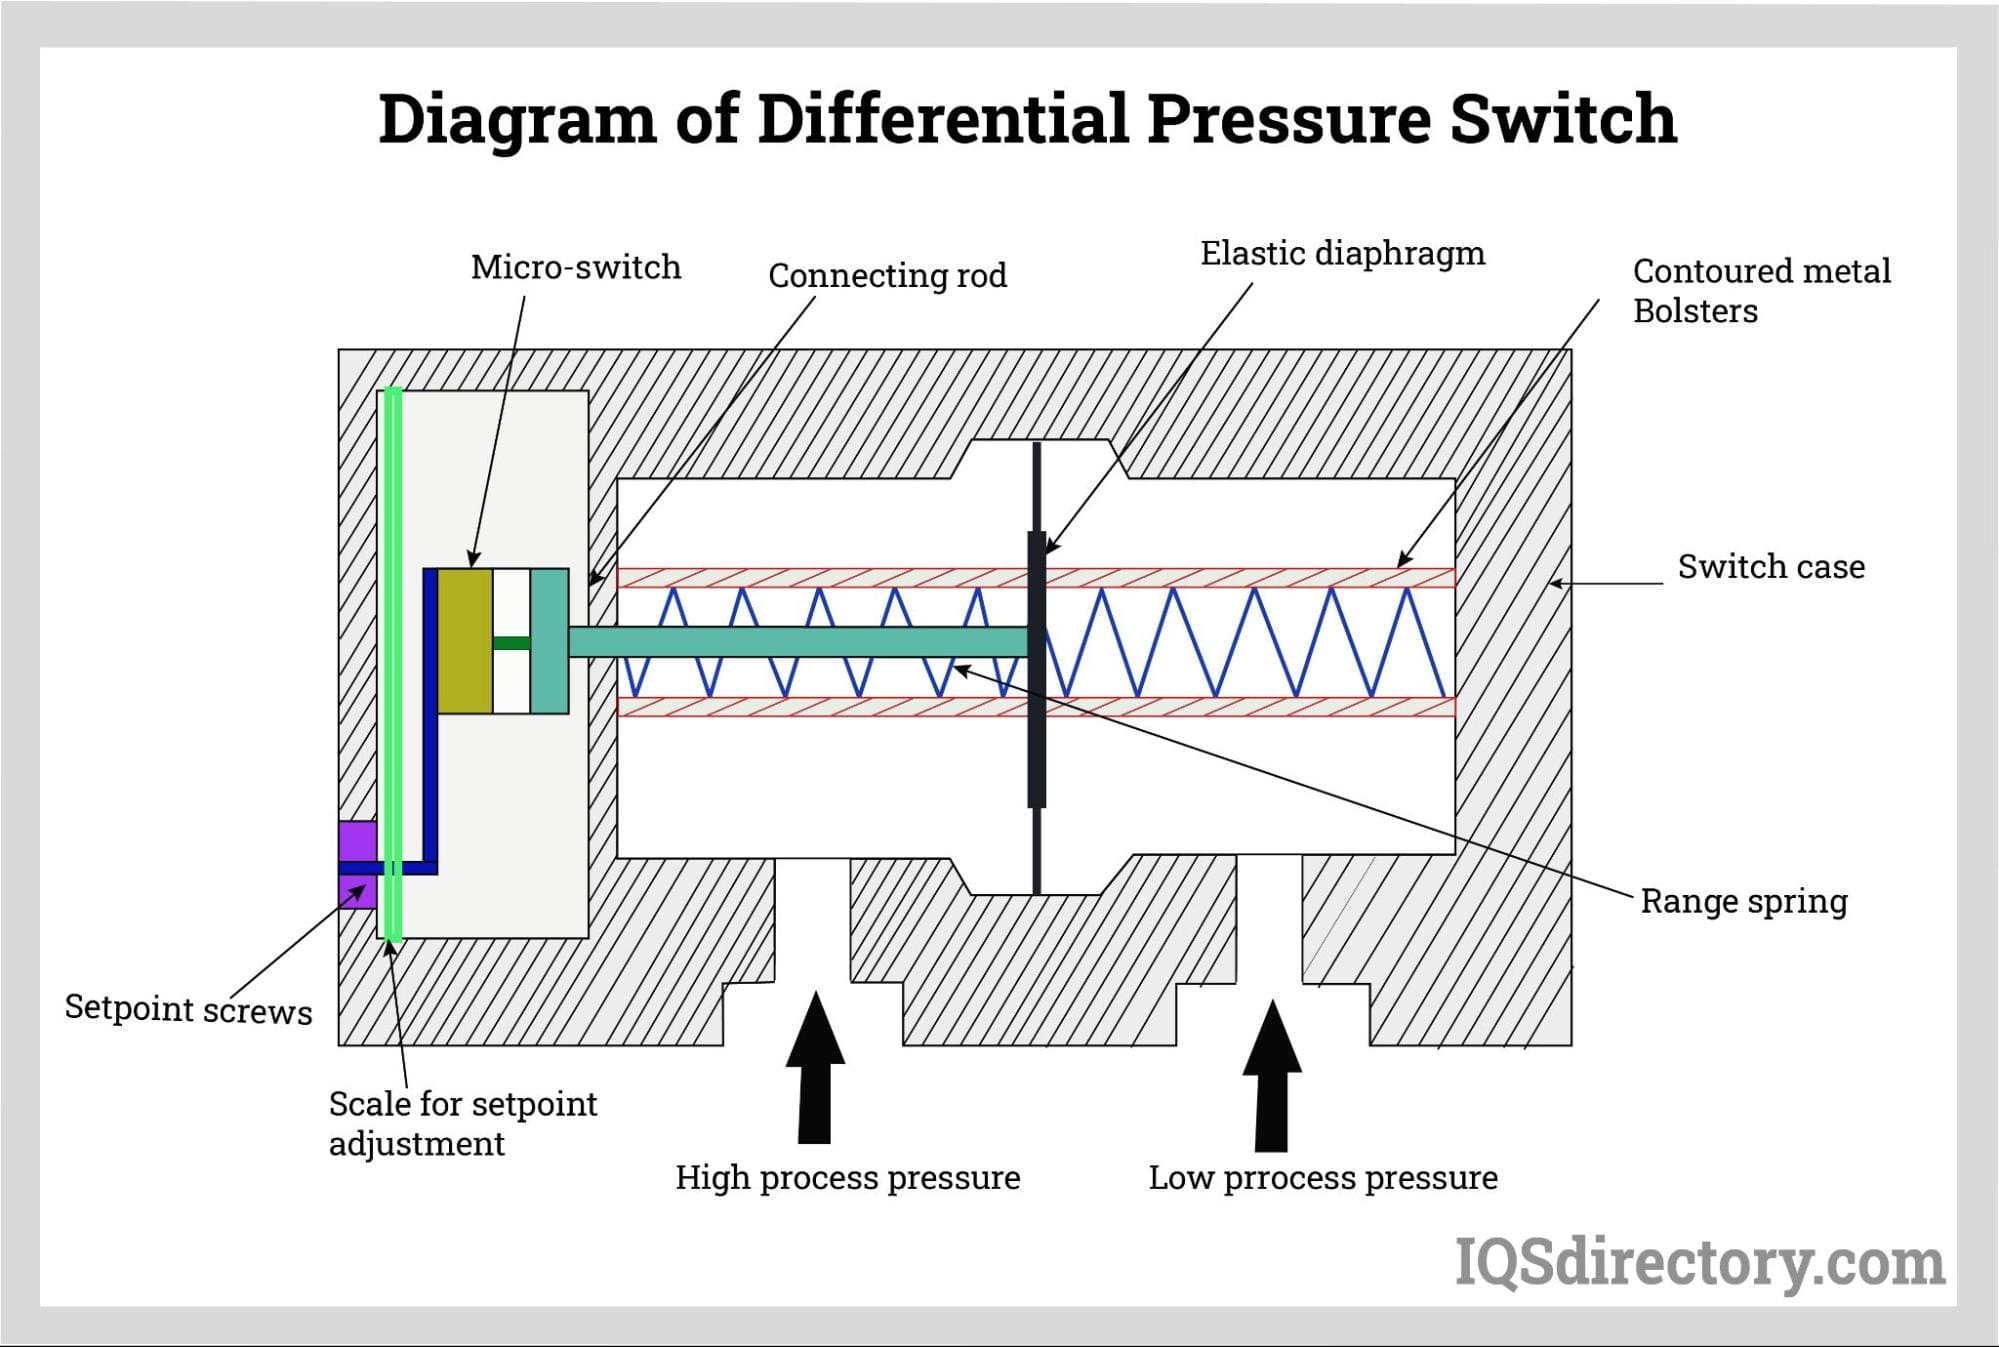 Diagram of Differential Pressure Switch